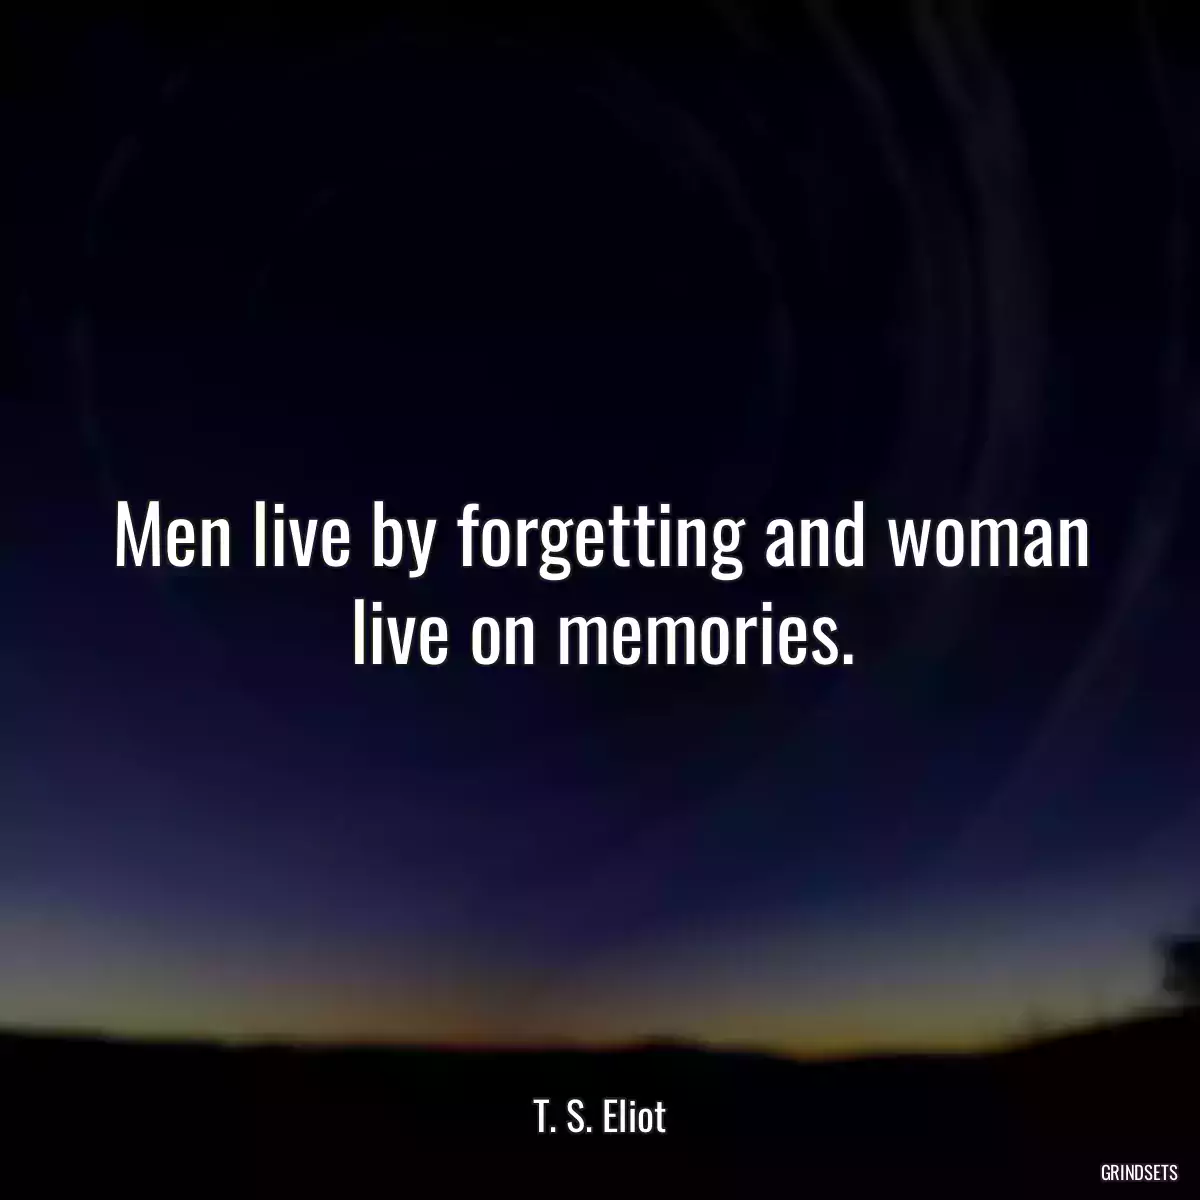 Men live by forgetting and woman live on memories.